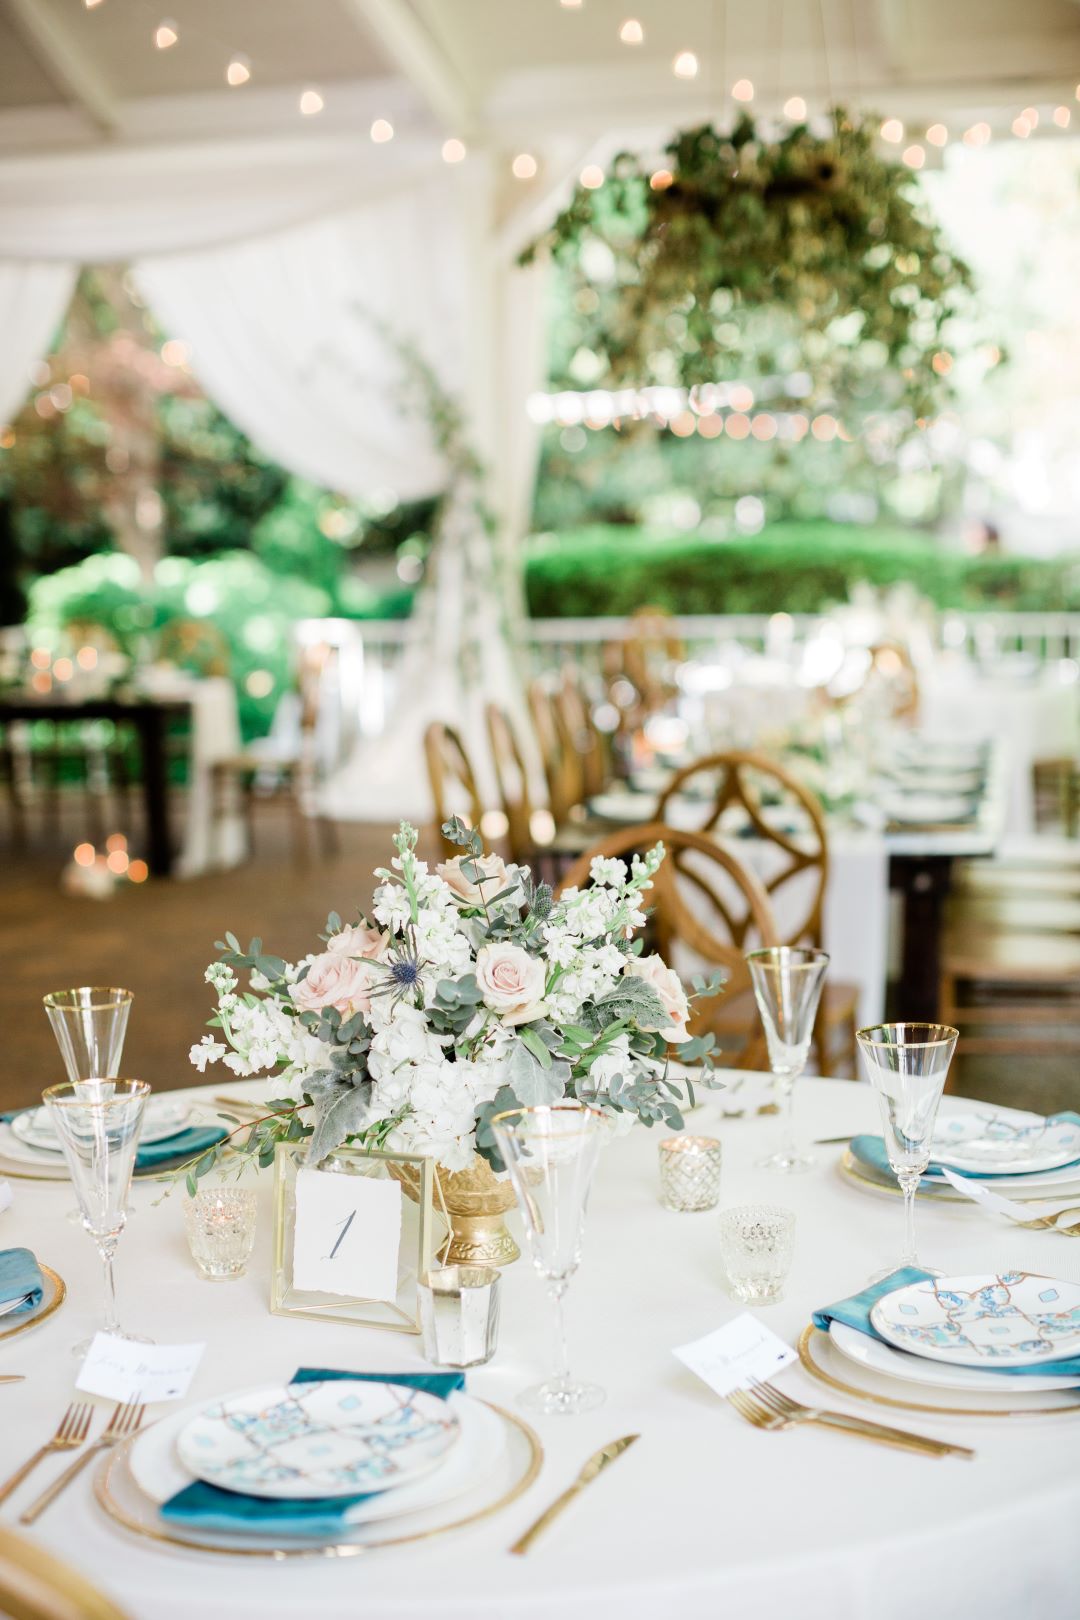 CJ's Off The Square | Beautiful floral centerpiece and table settings for romantic garden wedding